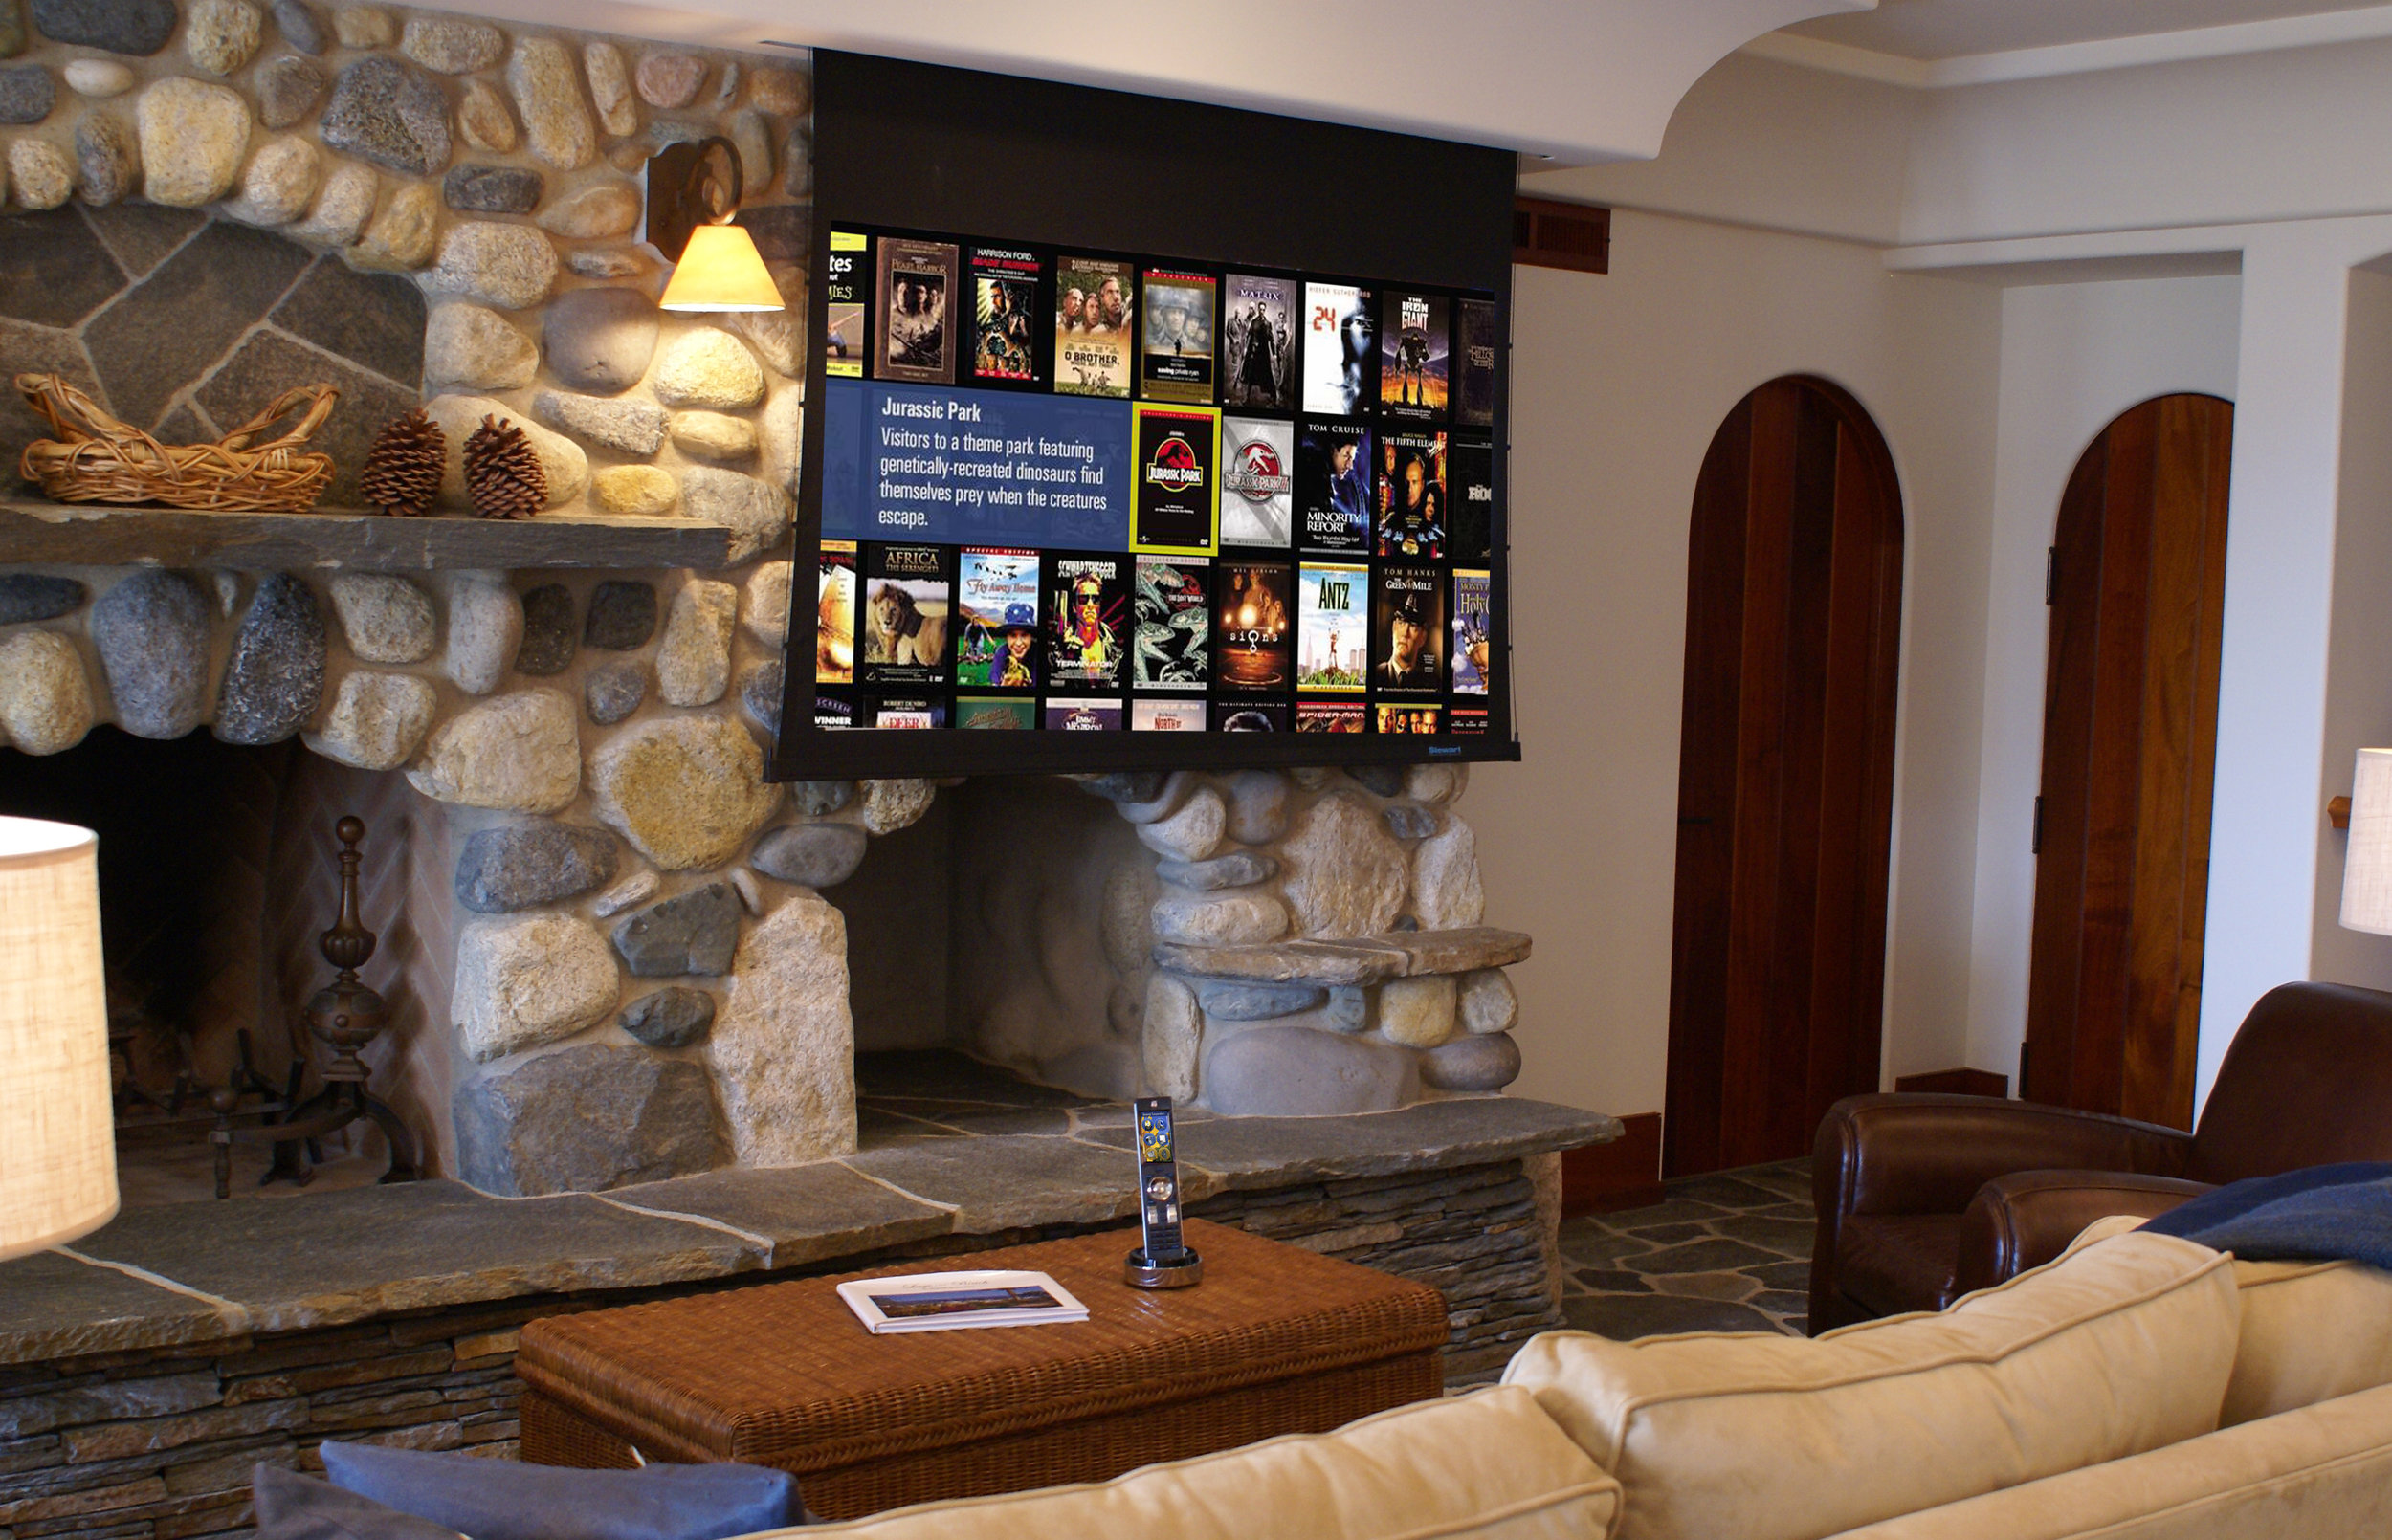  One of two media rooms on property, this motorized Stewart screen system disappears when not in use. 